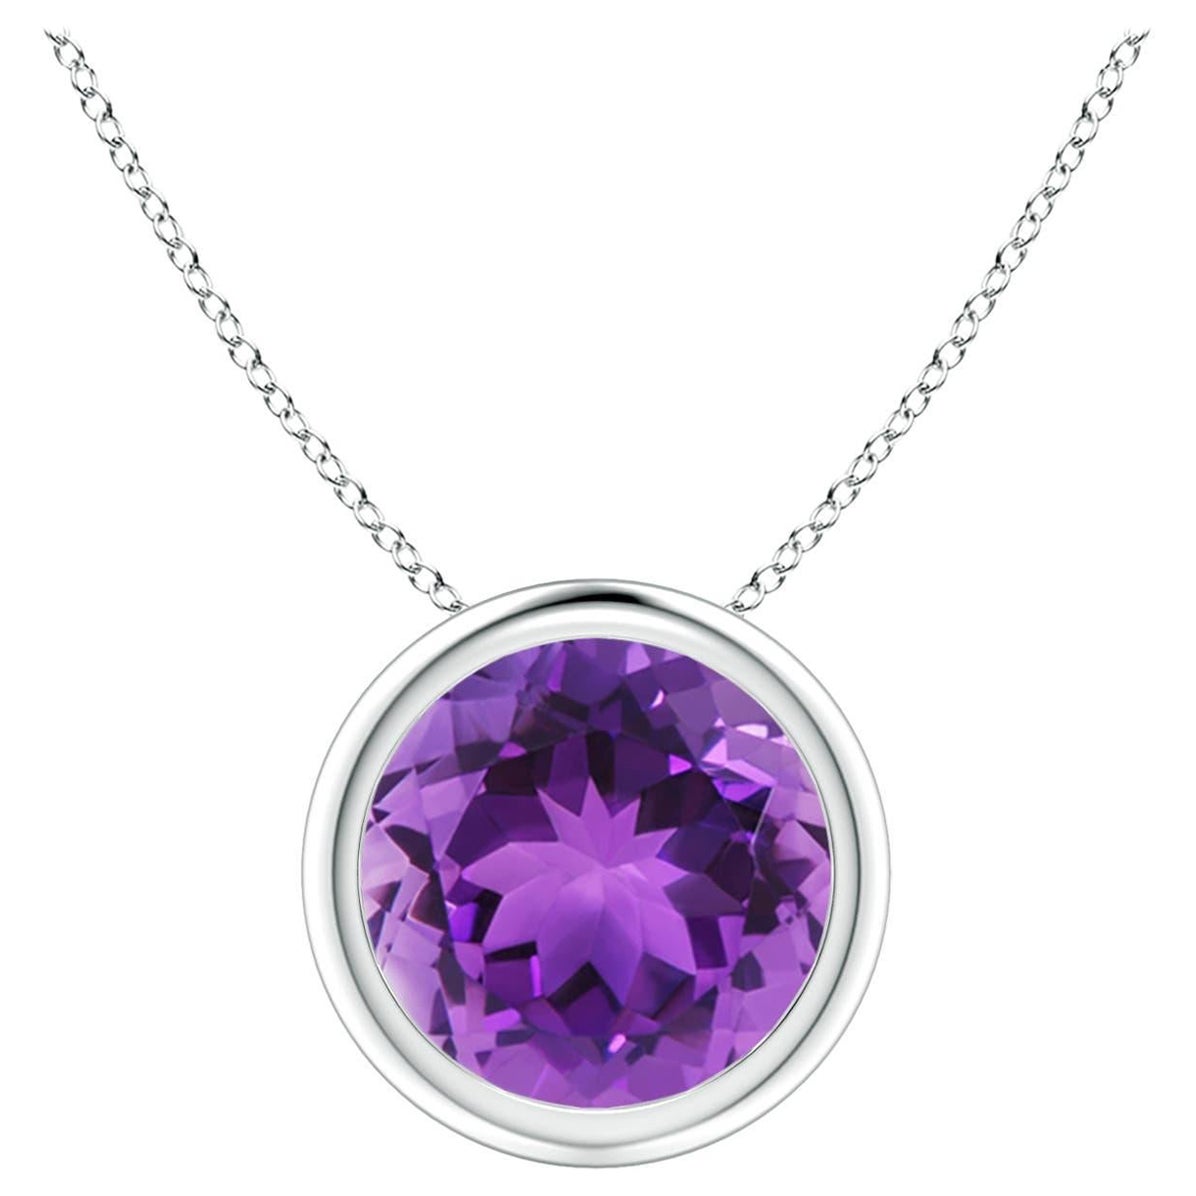 Natural Bezel-Set Round 1.7ct Amethyst Solitaire Pendant in 14K White Gold